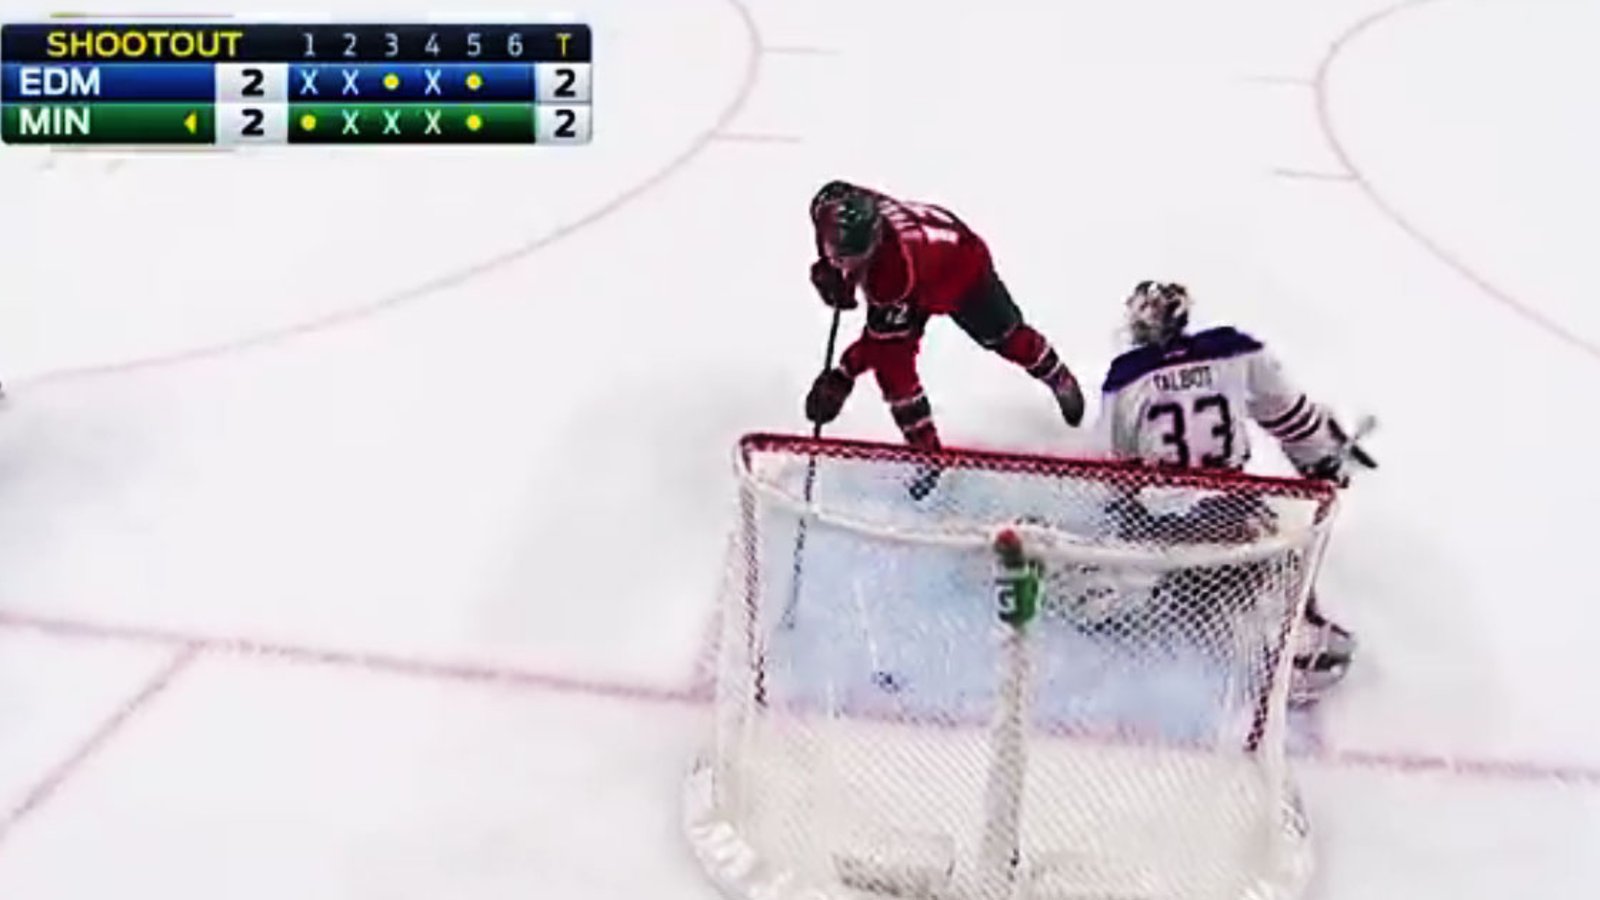 Must See: Eric Staal undresses Cam Talbot for the Shootout winner!